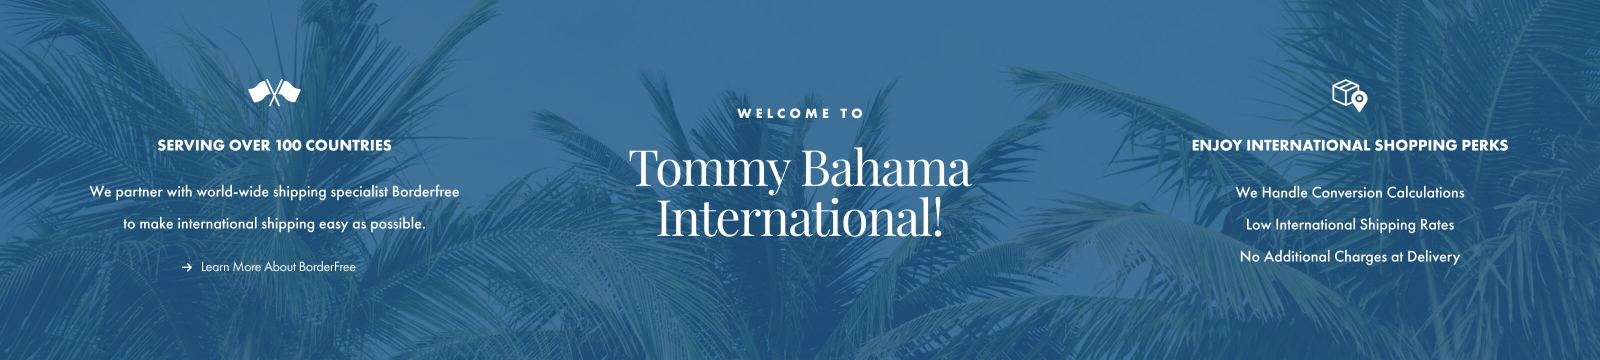 Welcome to Tommy Bahama International